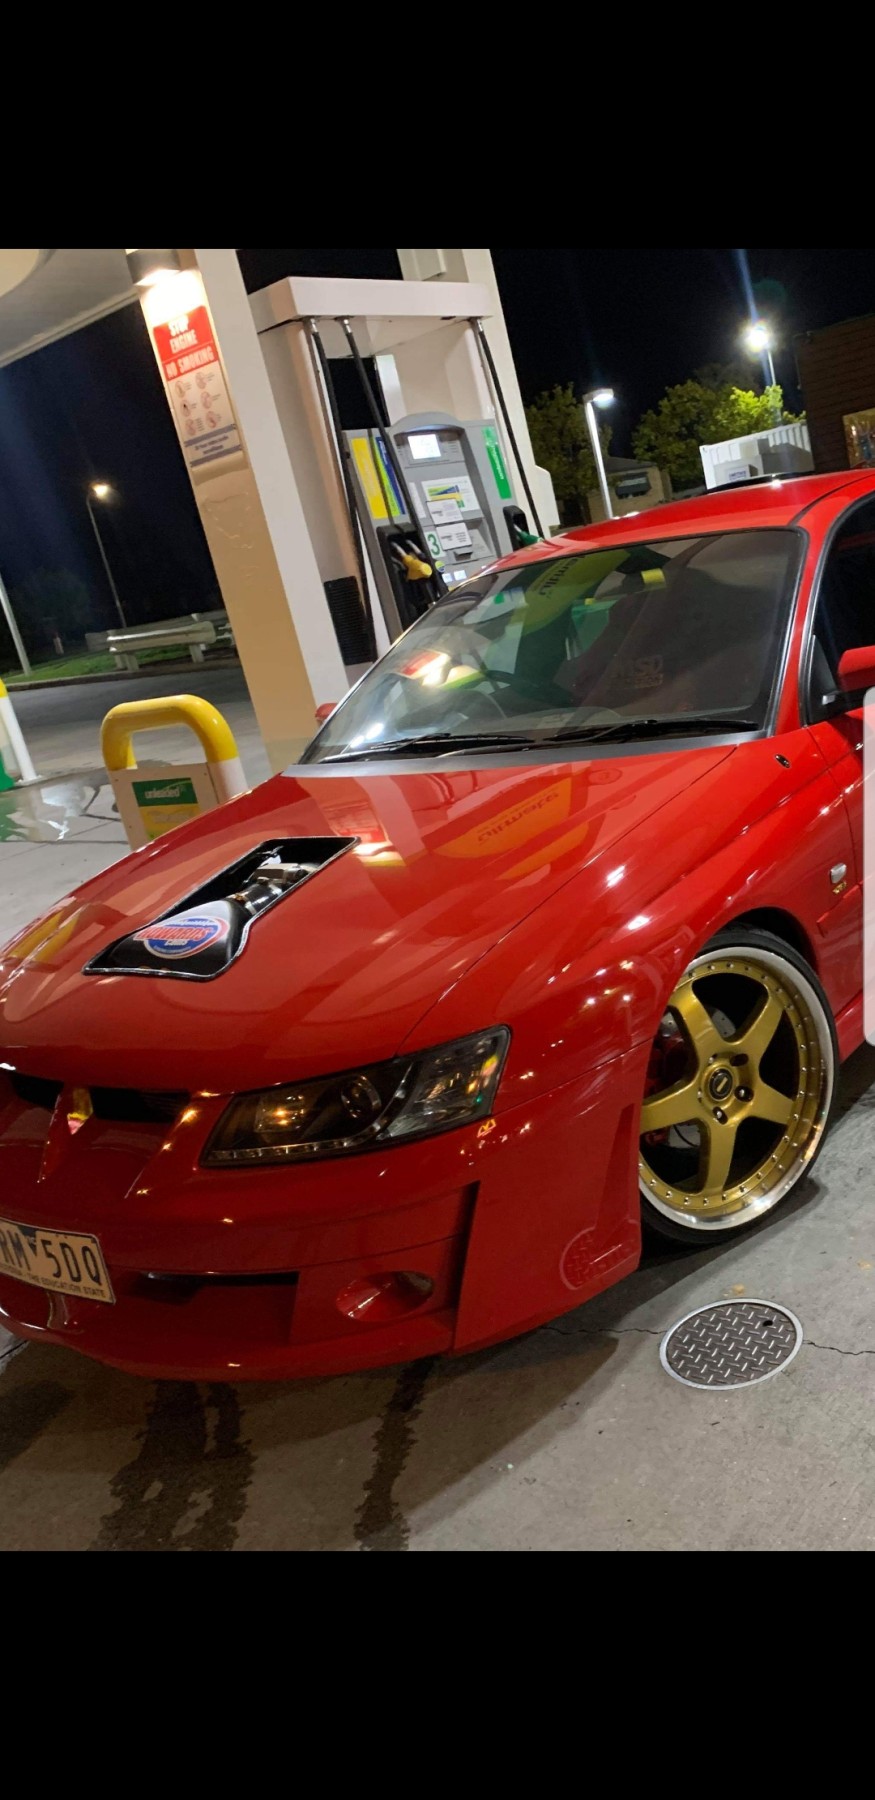 2004 Holden Vy ss